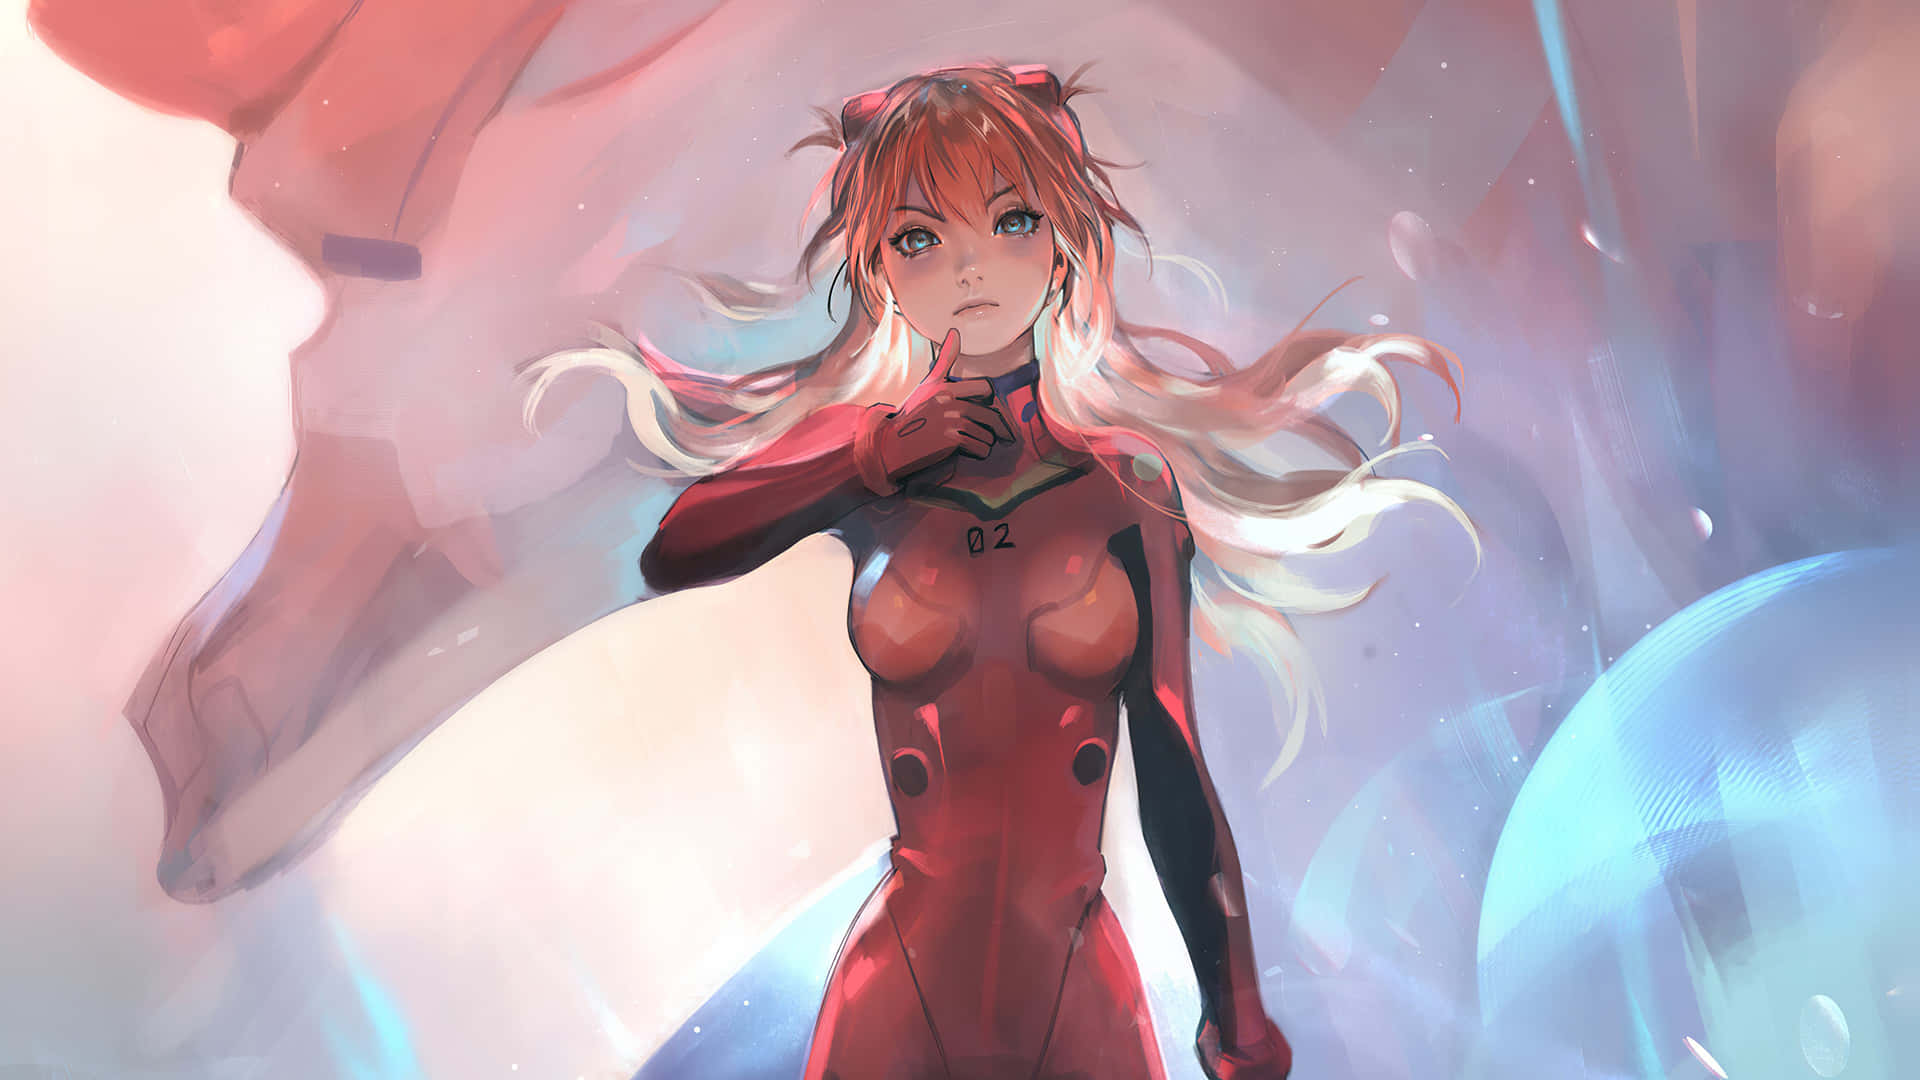 Get Ready for an Epic Adventure with the Evangelion Manga Wallpaper